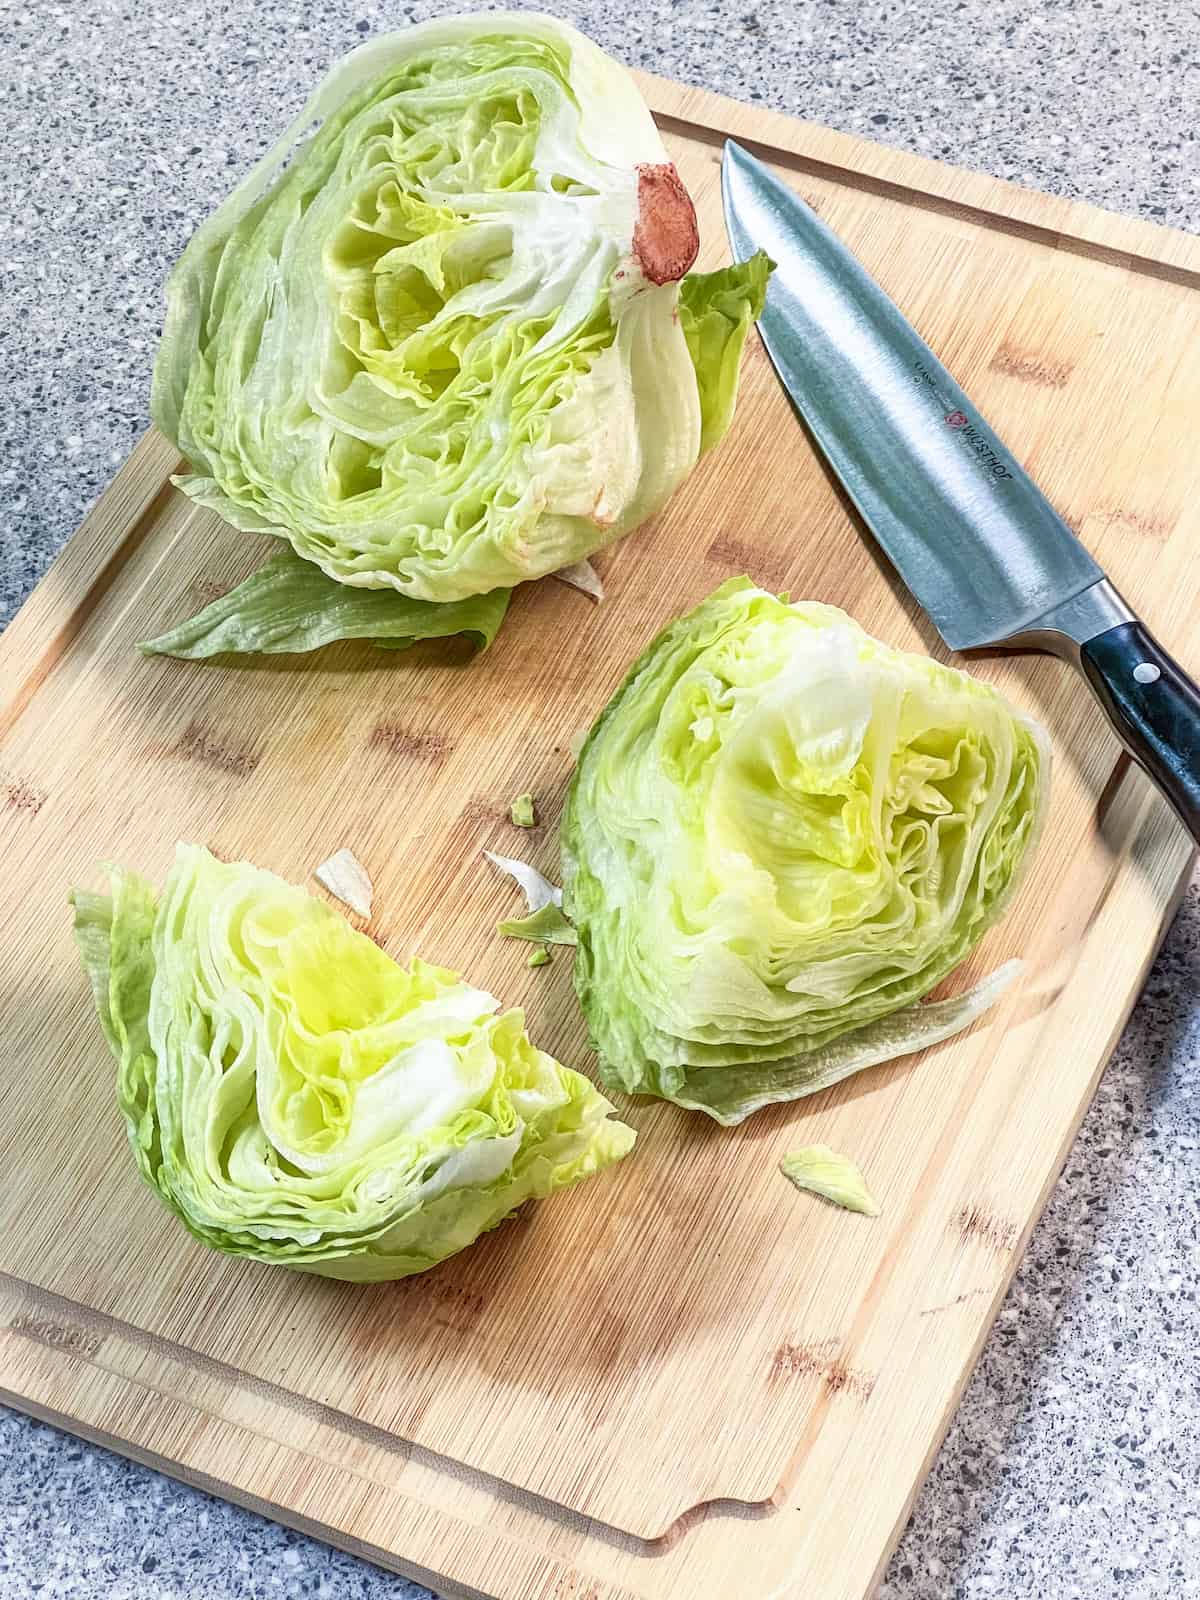 Head of iceberg lettuce cut in half and quarters on a cutting board with a knife.